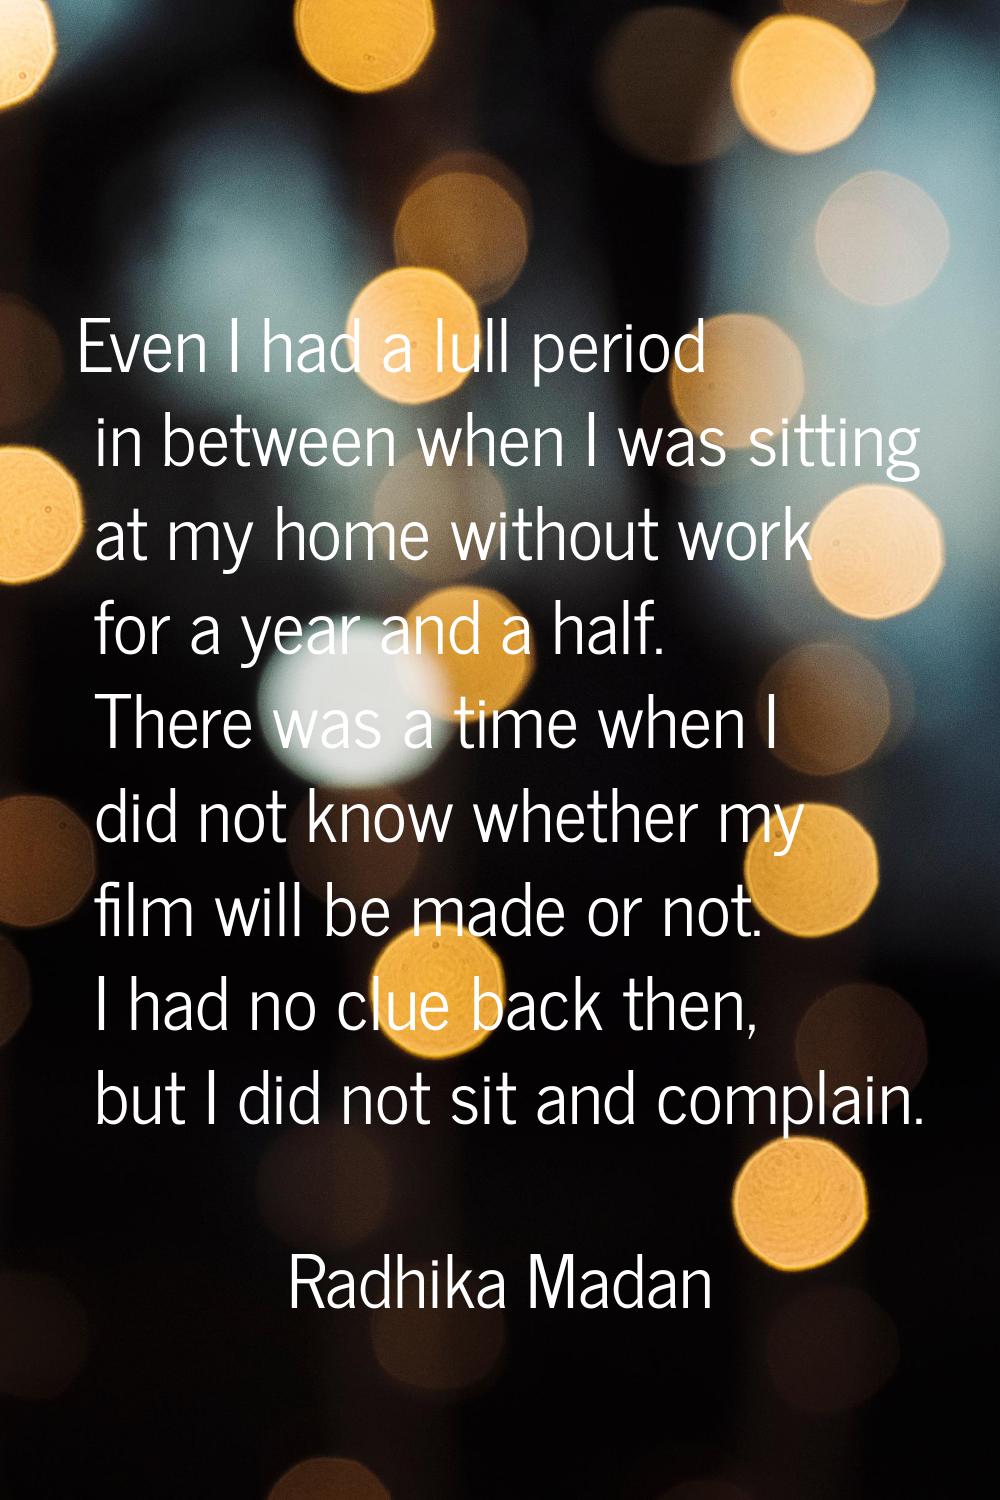 Even I had a lull period in between when I was sitting at my home without work for a year and a hal